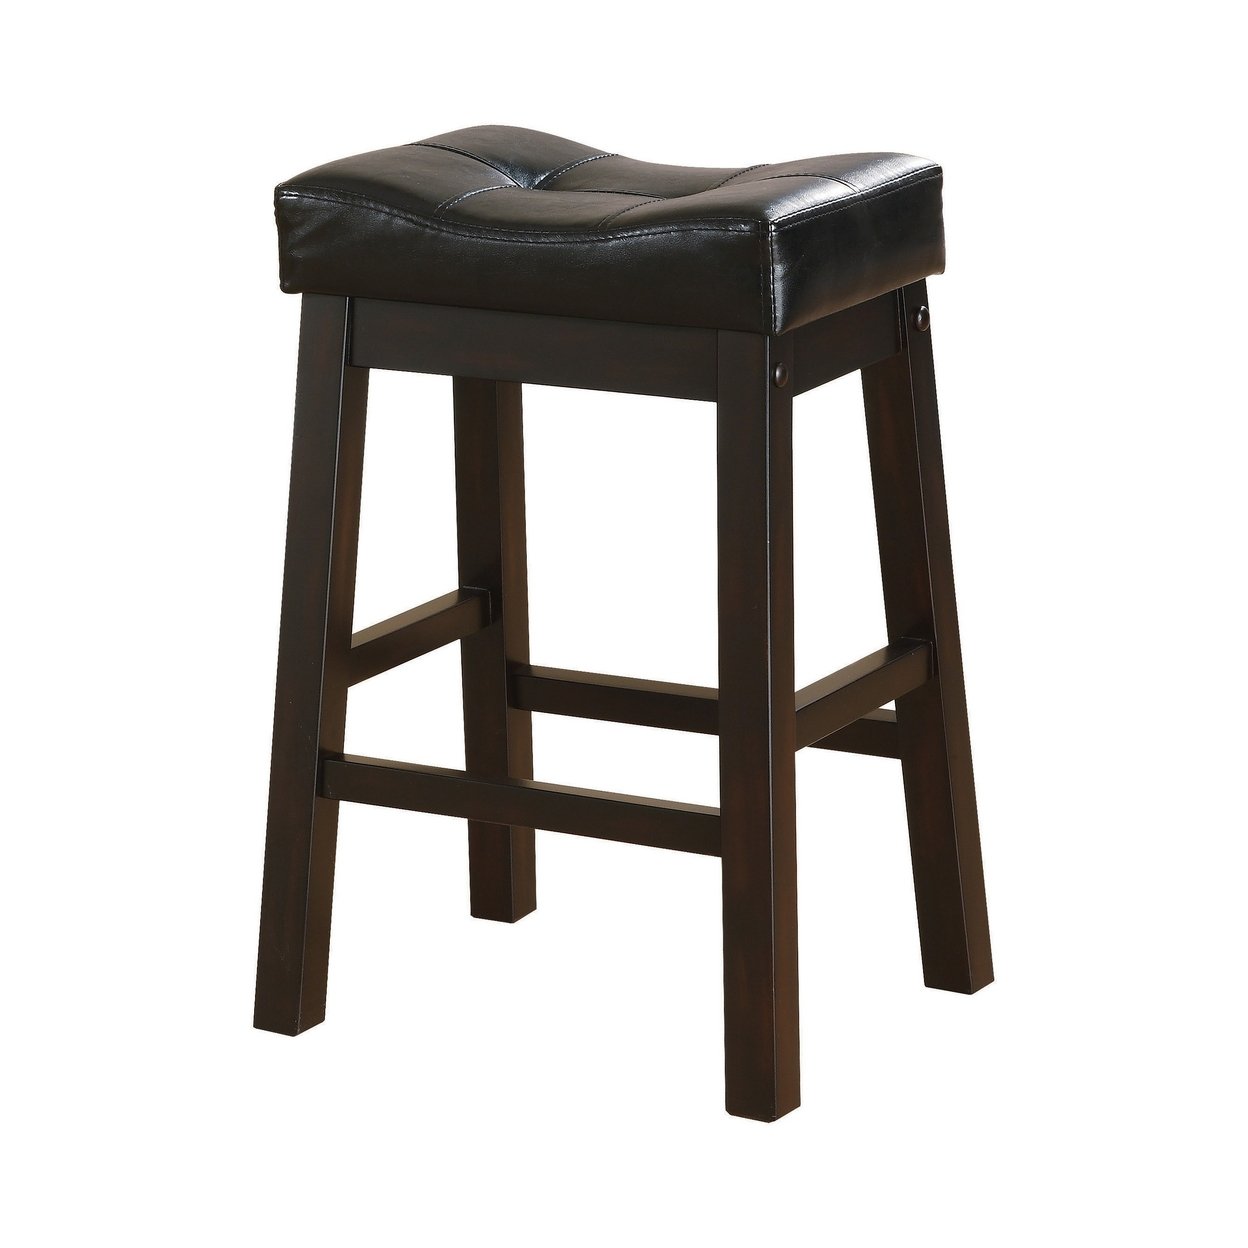 25 Inch Set Of 2 Counter Height Stools, Brown Faux Leather Saddle Seat- Saltoro Sherpi